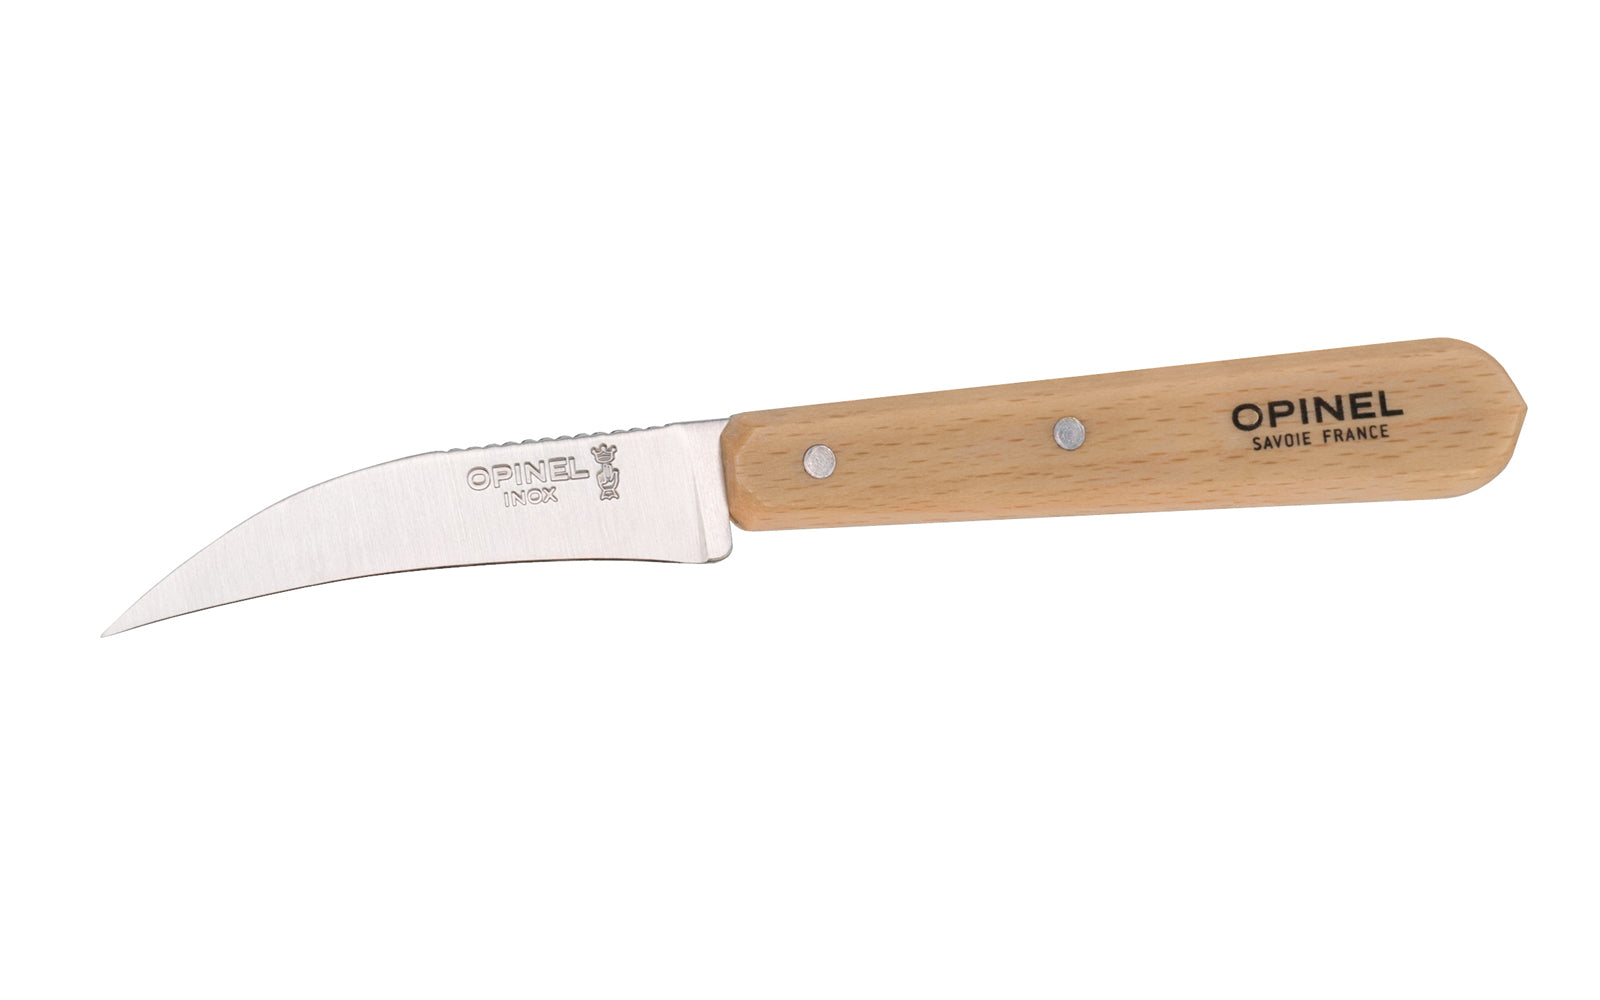 Opinel Stainless Steel Vegetable Knife. Model 114. Excellent for chopping & slicing up small vegetables like mushrooms, & small fruits like nectarines, peaches, strawberries, etc. The handsome Beechwood handle is varnished for beautiful look. Made in France.